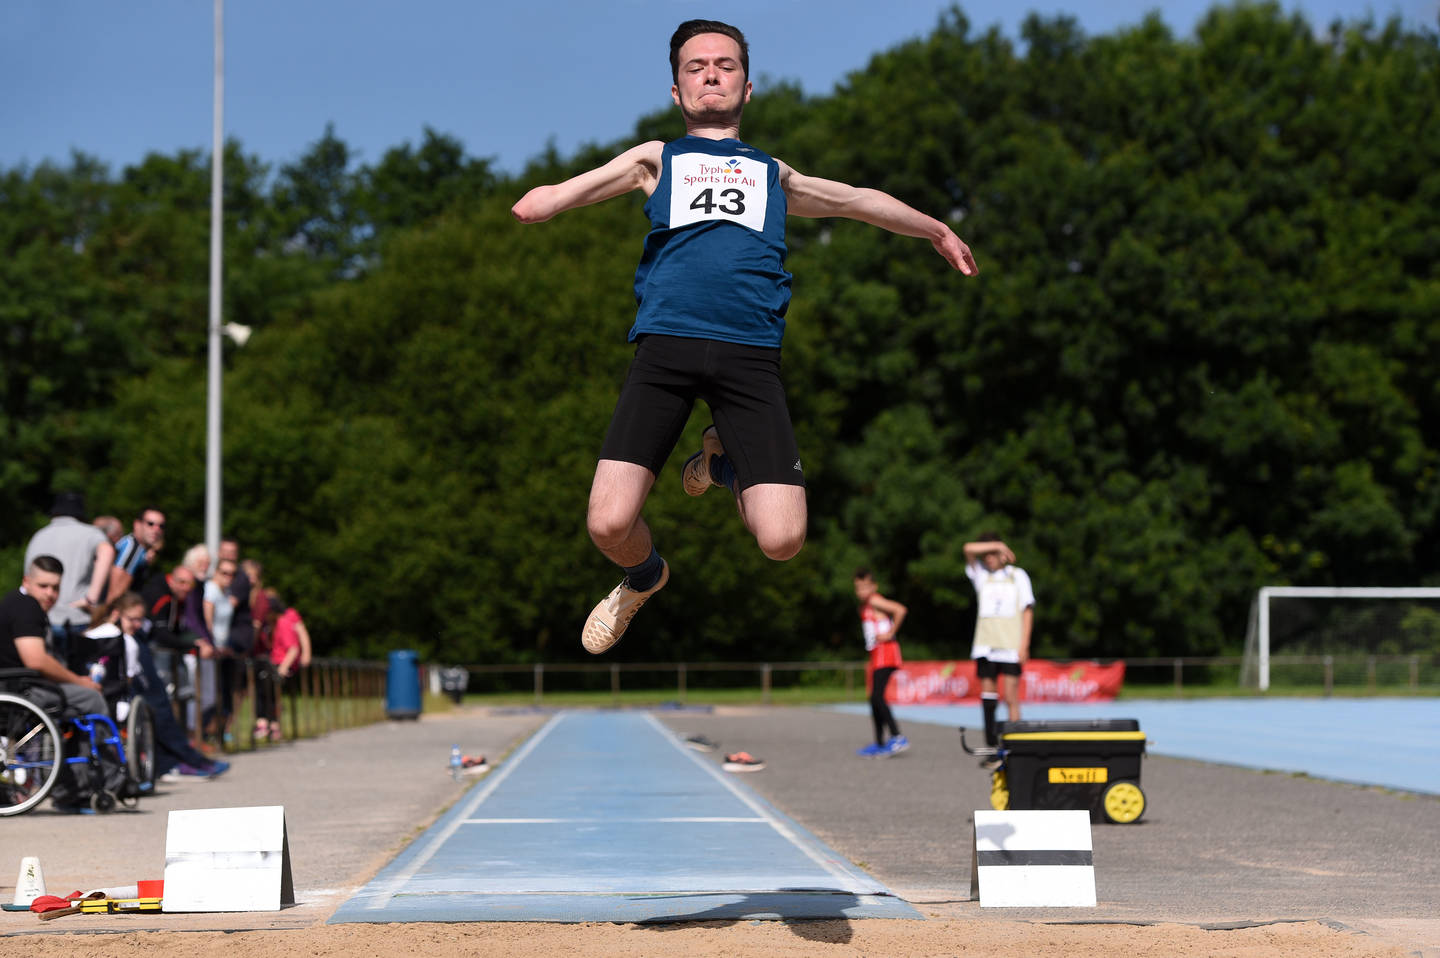 Junior athlete taking part in the long jump